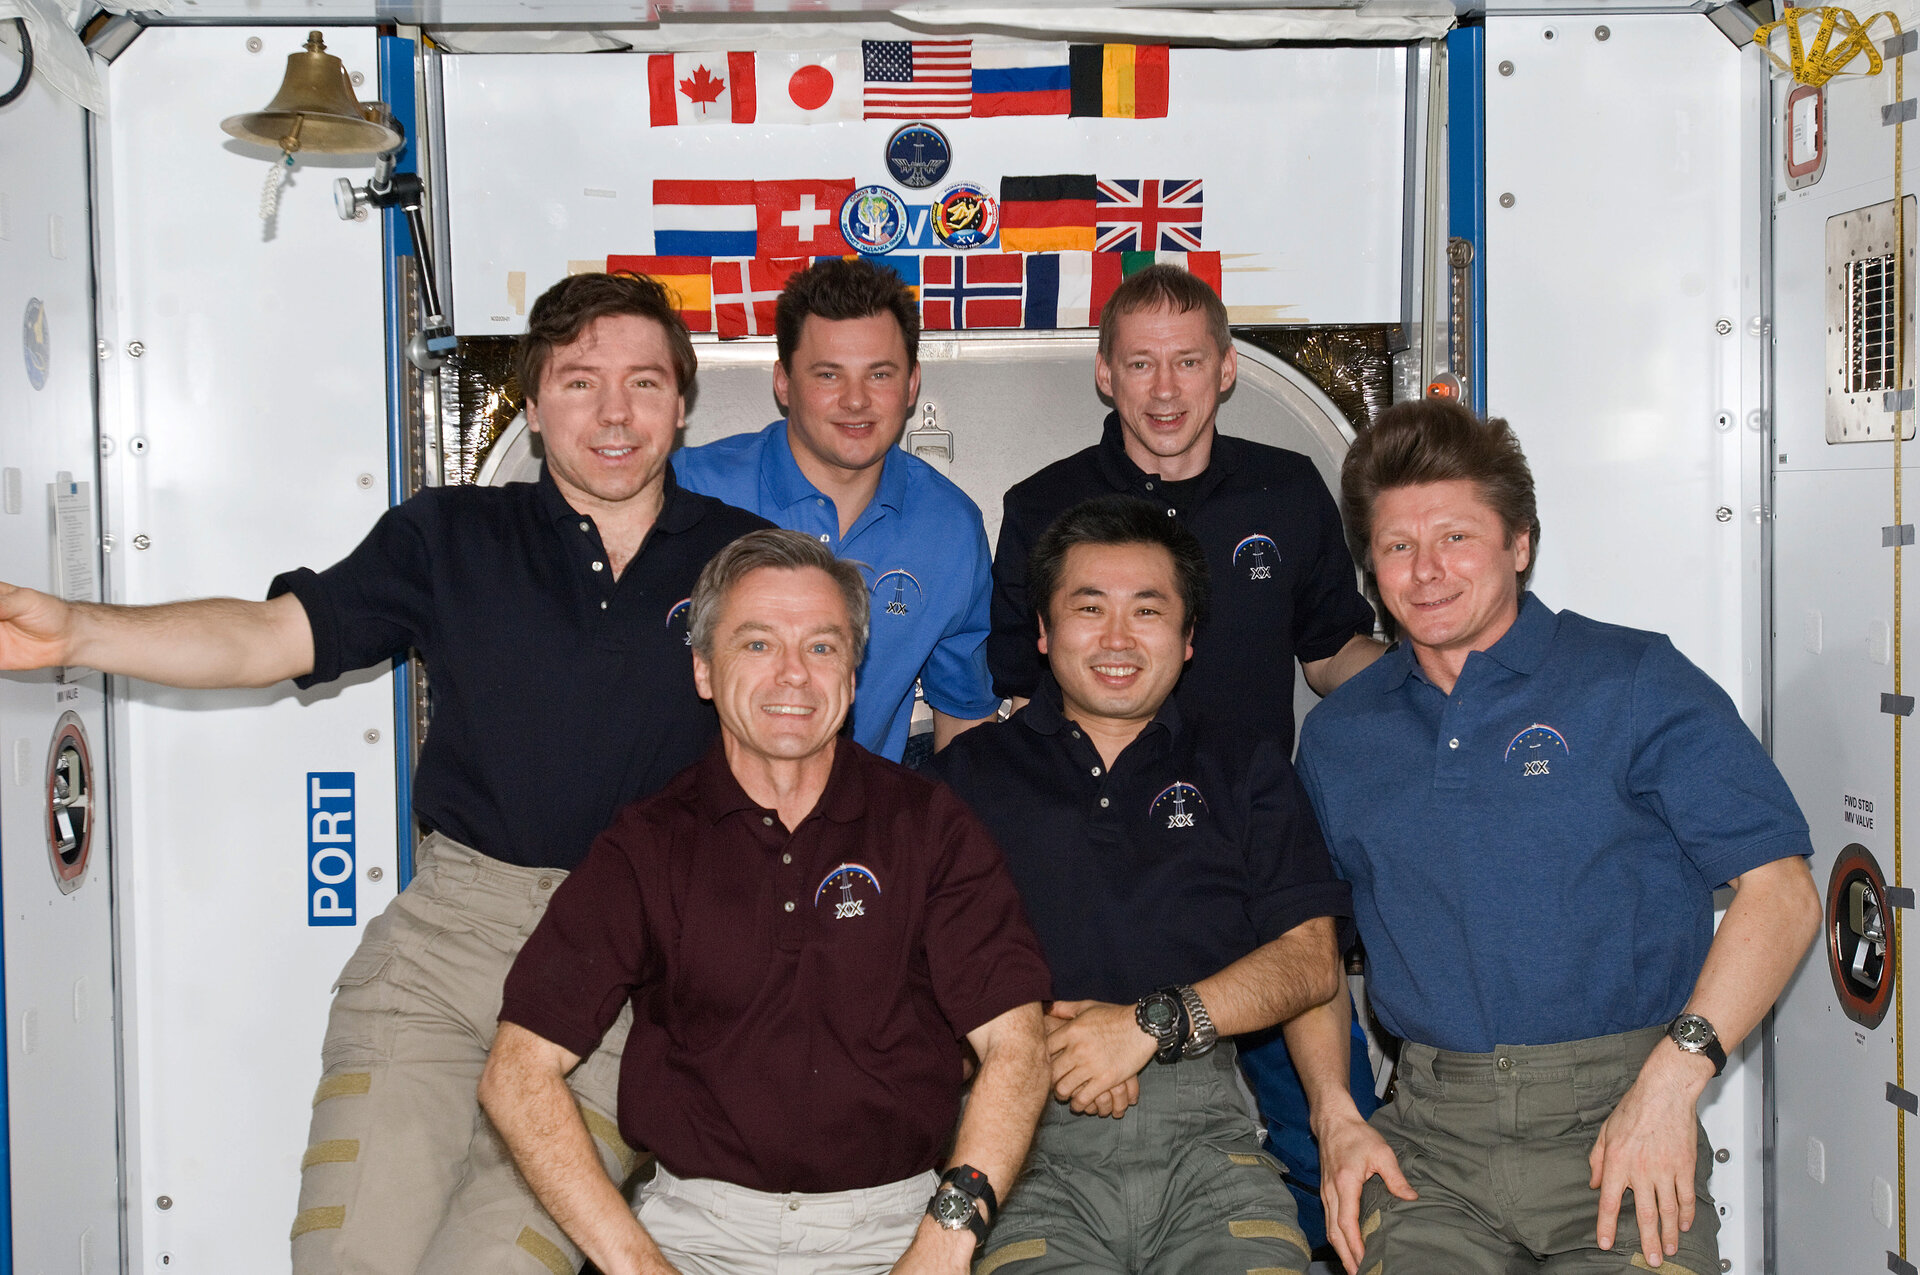 Expedition 20 - the first crew of six on the International Space Station